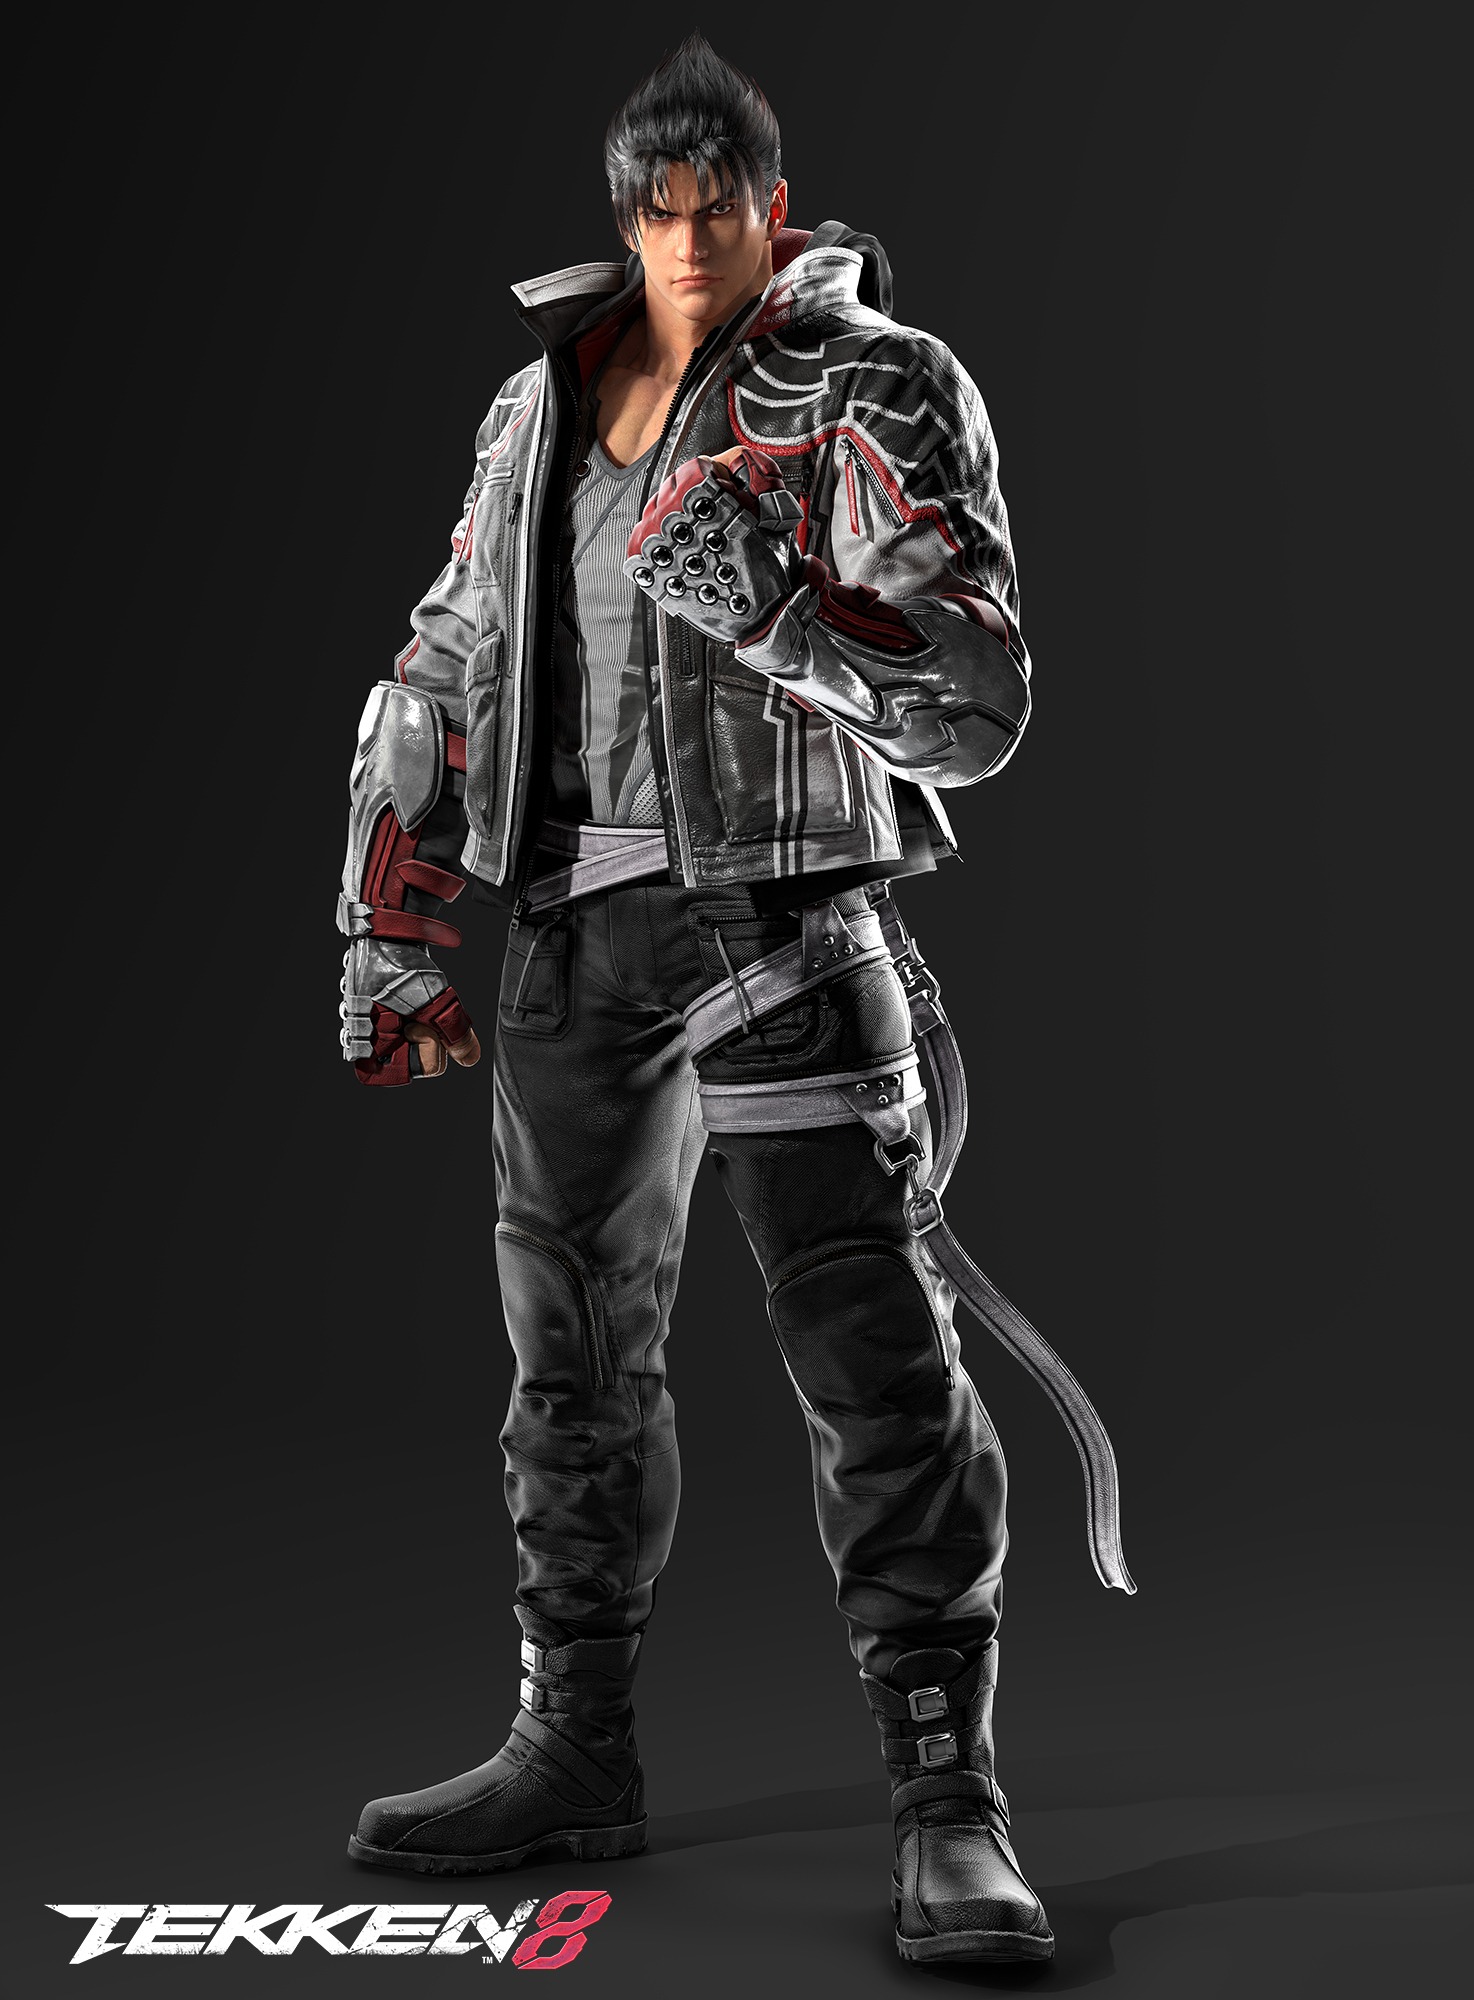 Official character render of Jin